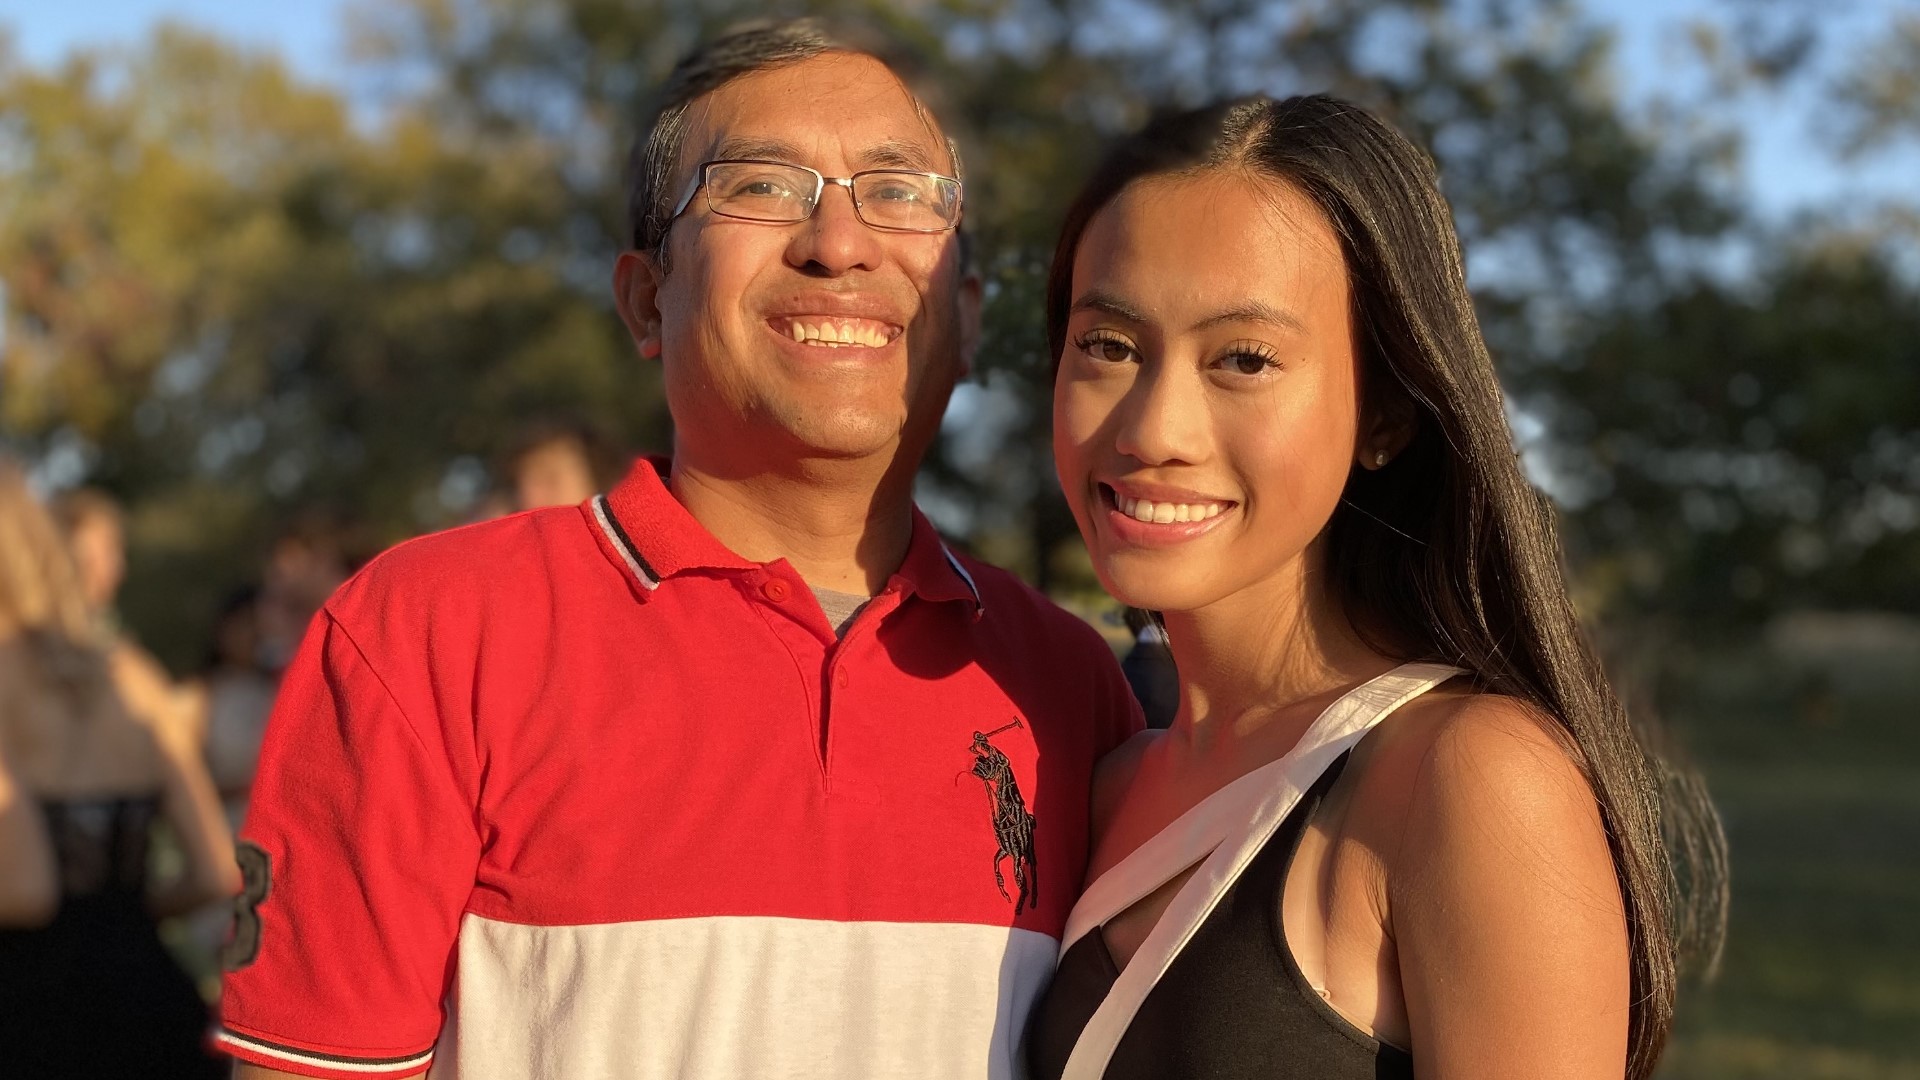 Dr. Cesar Termulo's daughter died in January 2020 due to complications from the flu. He speaks out as flu numbers remain high in the DFW area.